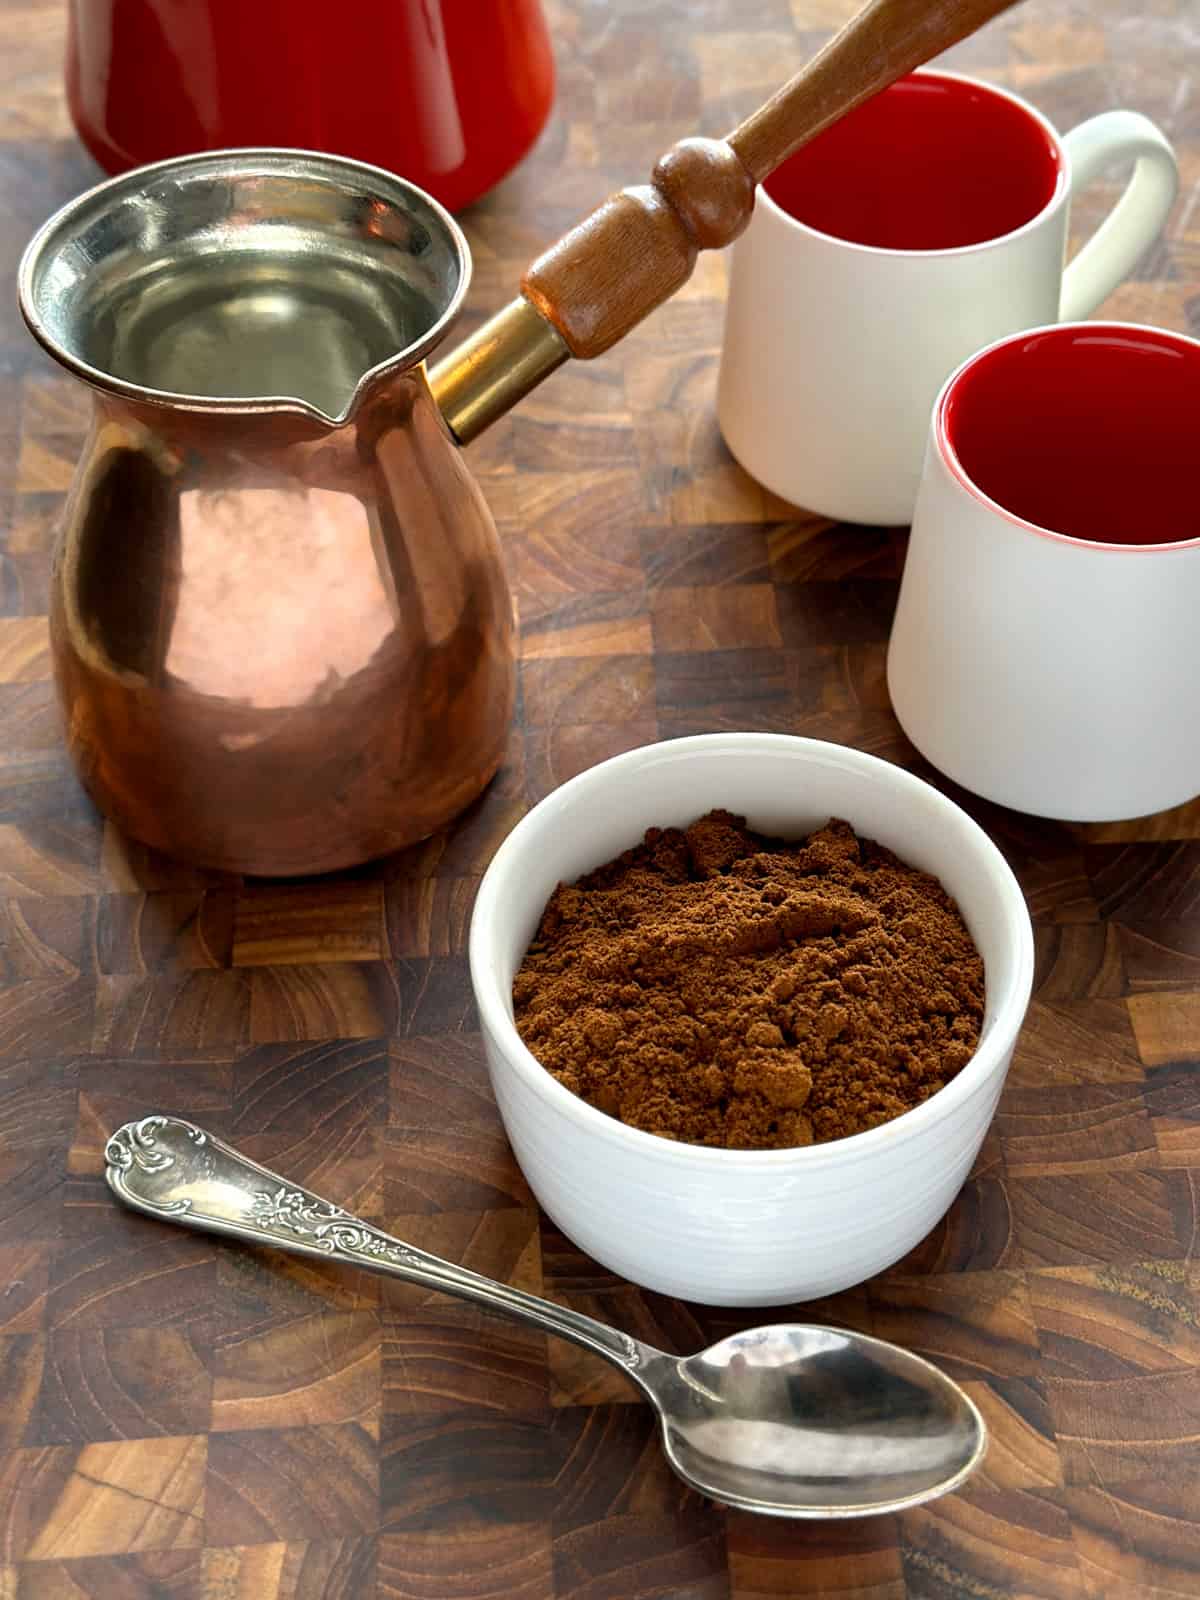 A copper pot, two small coffee cups, a bowl with greek coffee, and a spoon, on a wooden surface.